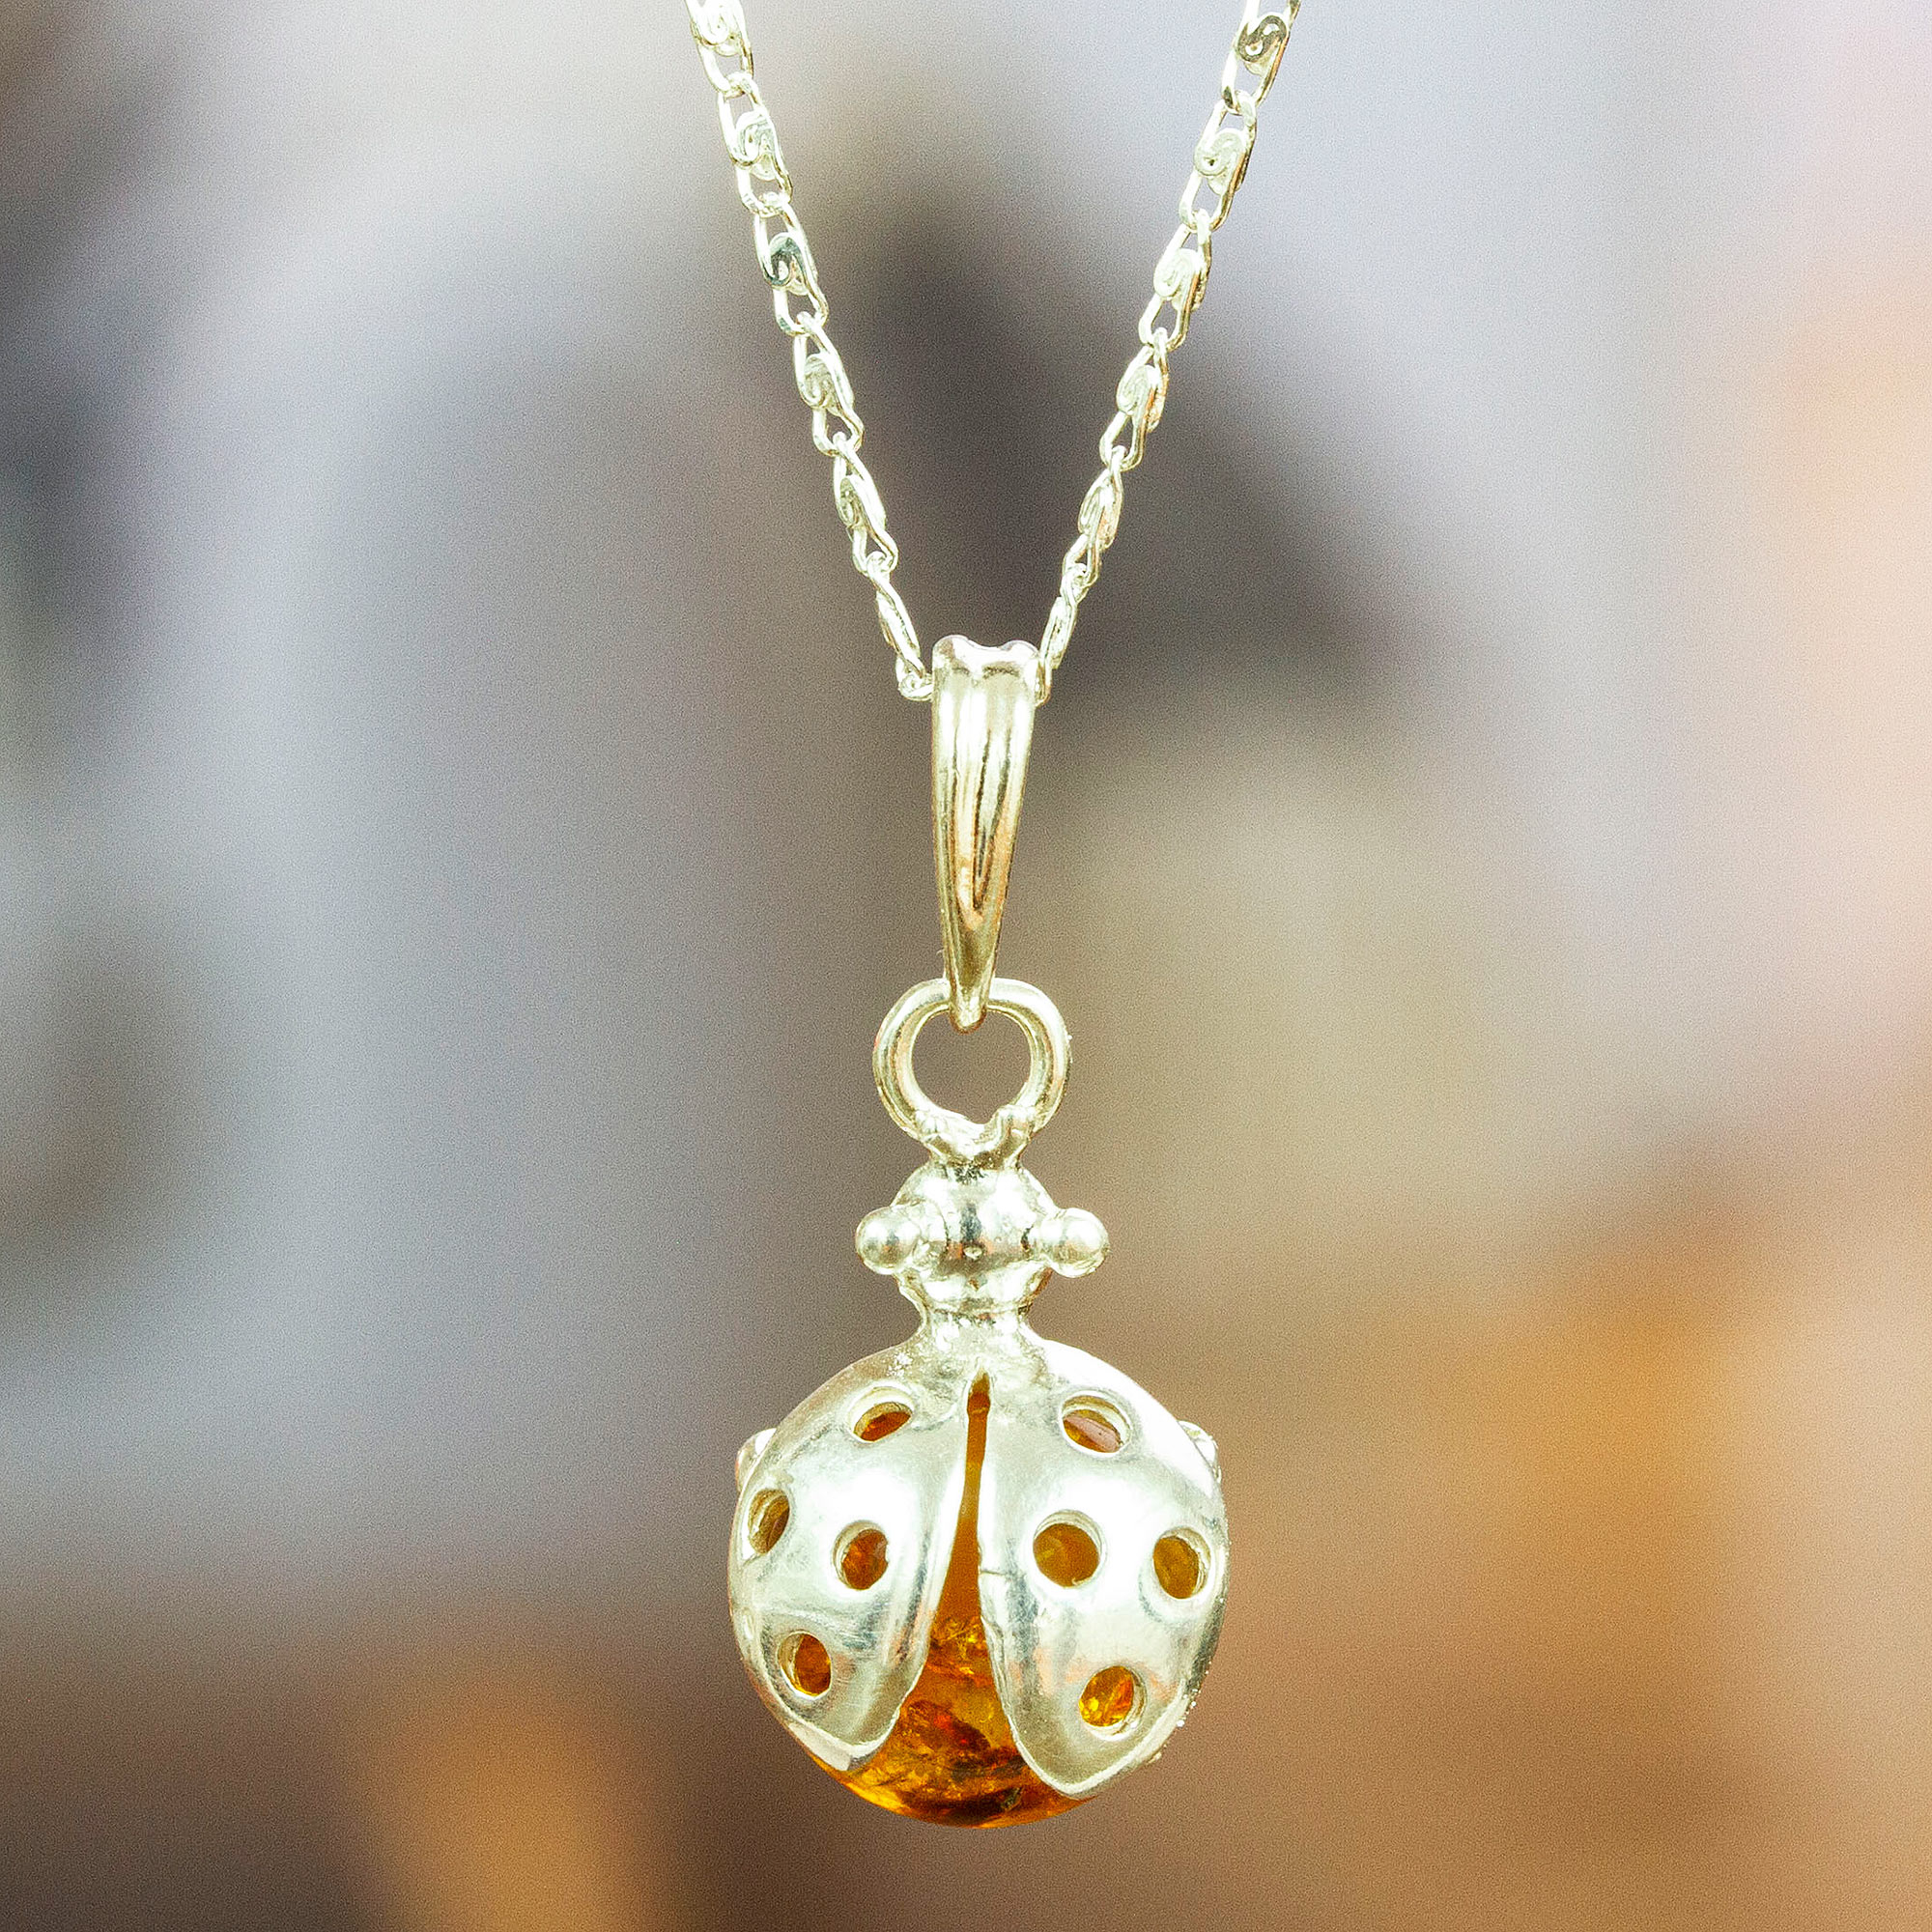 925 Sterling Silver and Amber Pendant Necklace from Mexico - Bright Ladybug  | NOVICA